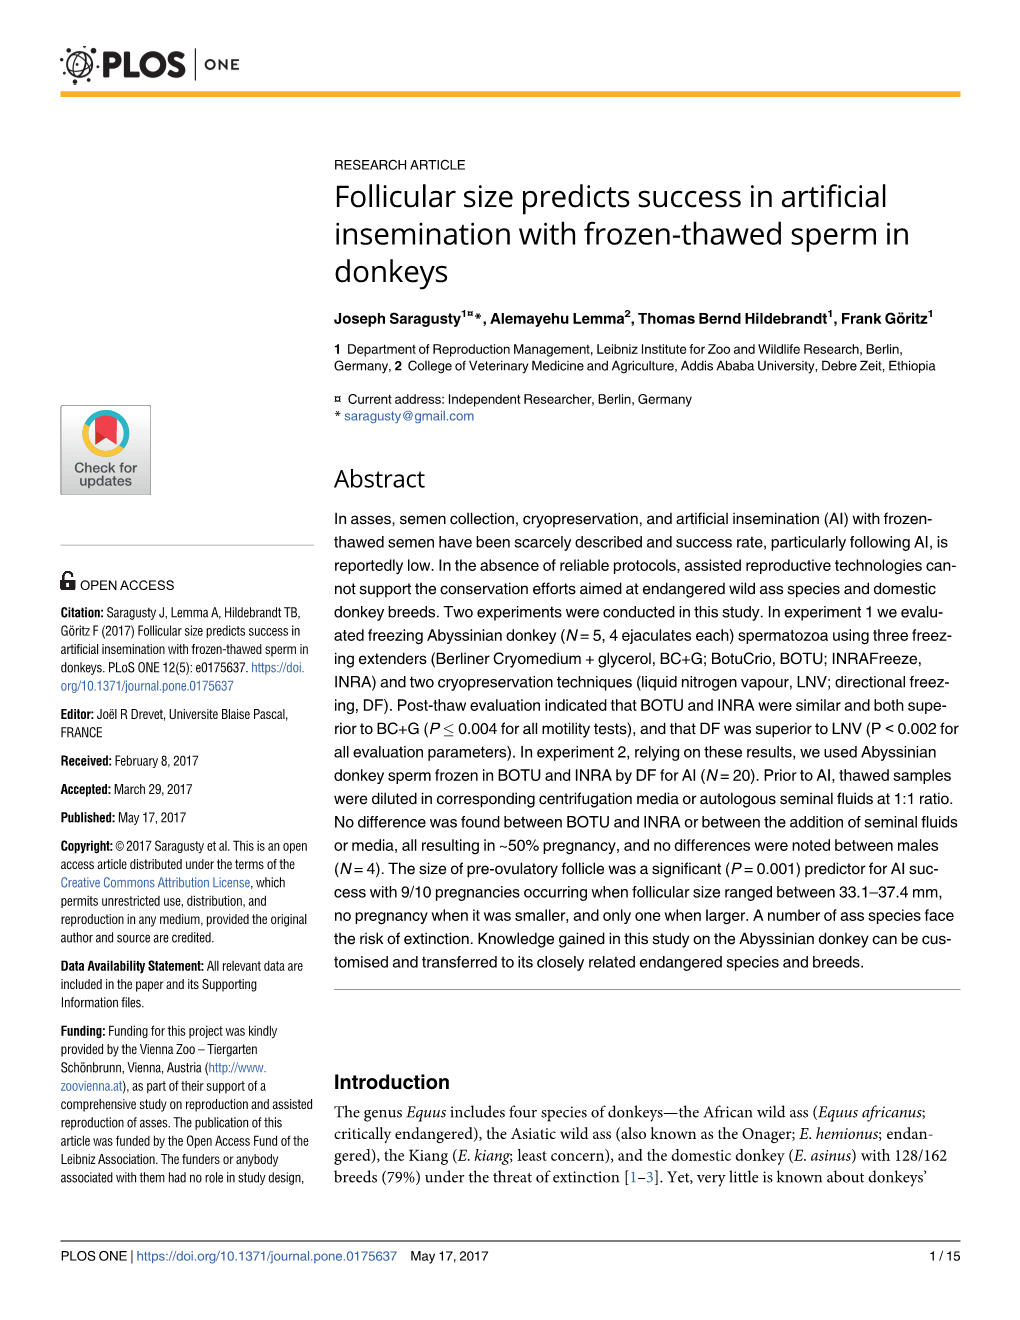 Follicular Size Predicts Success in Artificial Insemination with Frozen-Thawed Sperm in Donkeys